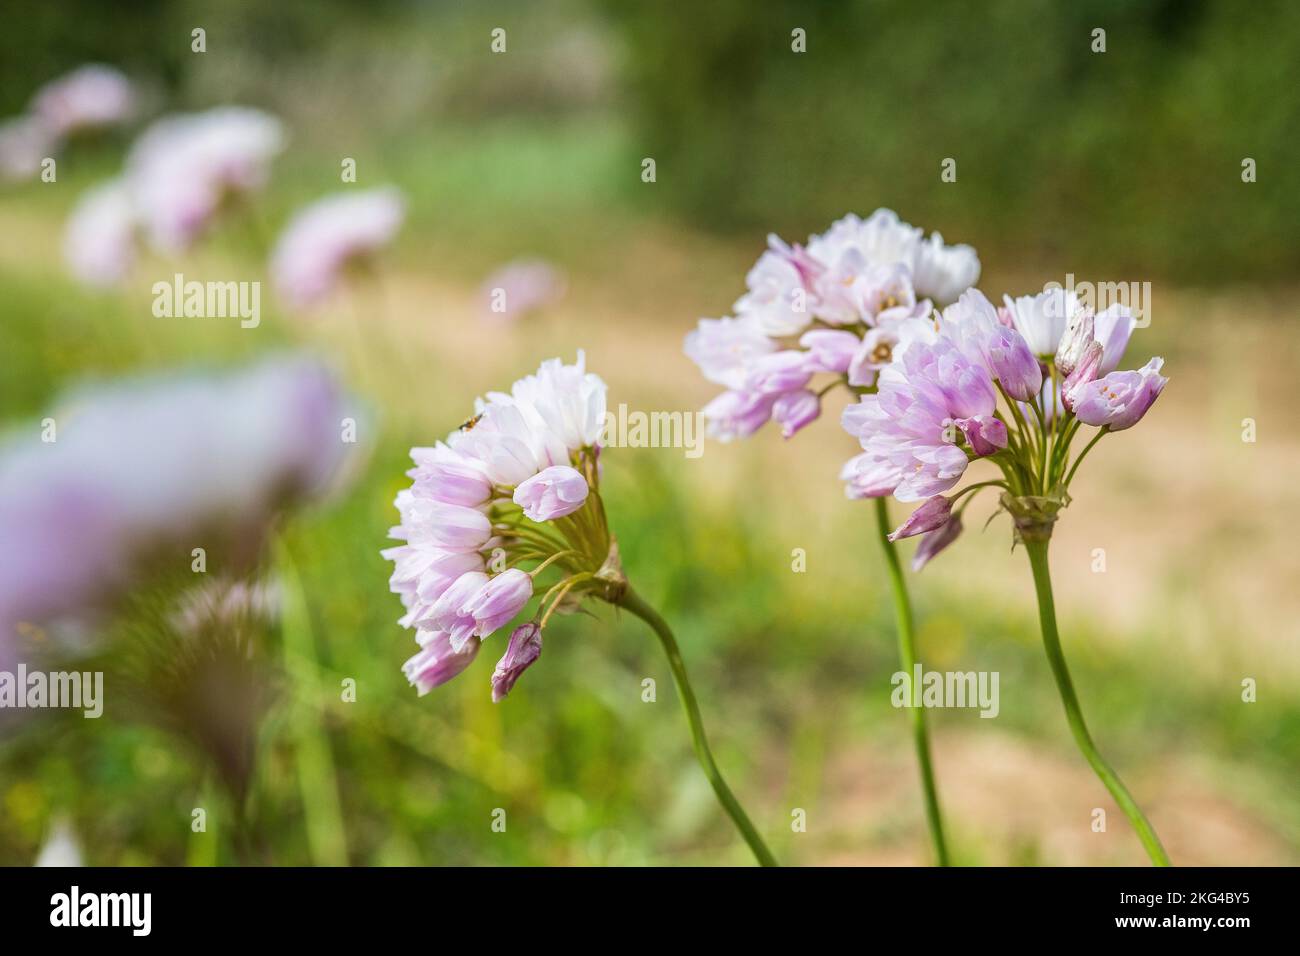 Allium roseum, commonly called rosy garlic is an edible, Old World species of wild garlic. Stock Photo